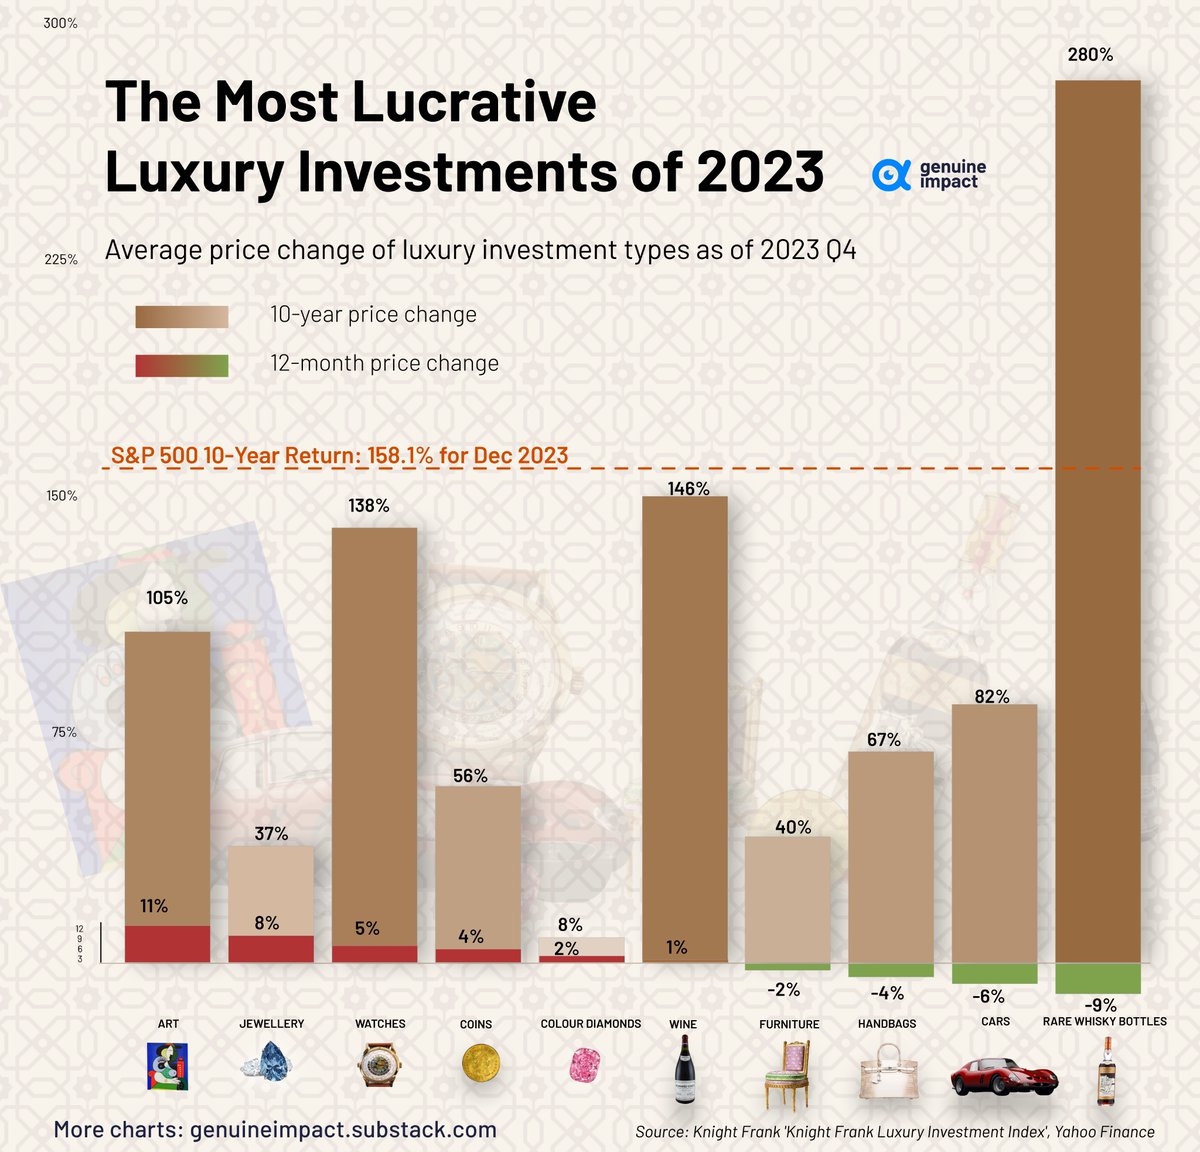 Returns on different types of luxury goods have ranged from 8% to 280% over the last 10 years, compared to 158.1% for the S&P 500. However , only one has outperformed the S&P 500 in terms of 10-year returns: Rare whiskey🥃, boasting an impressive 280% return. #whiskey #Macallan